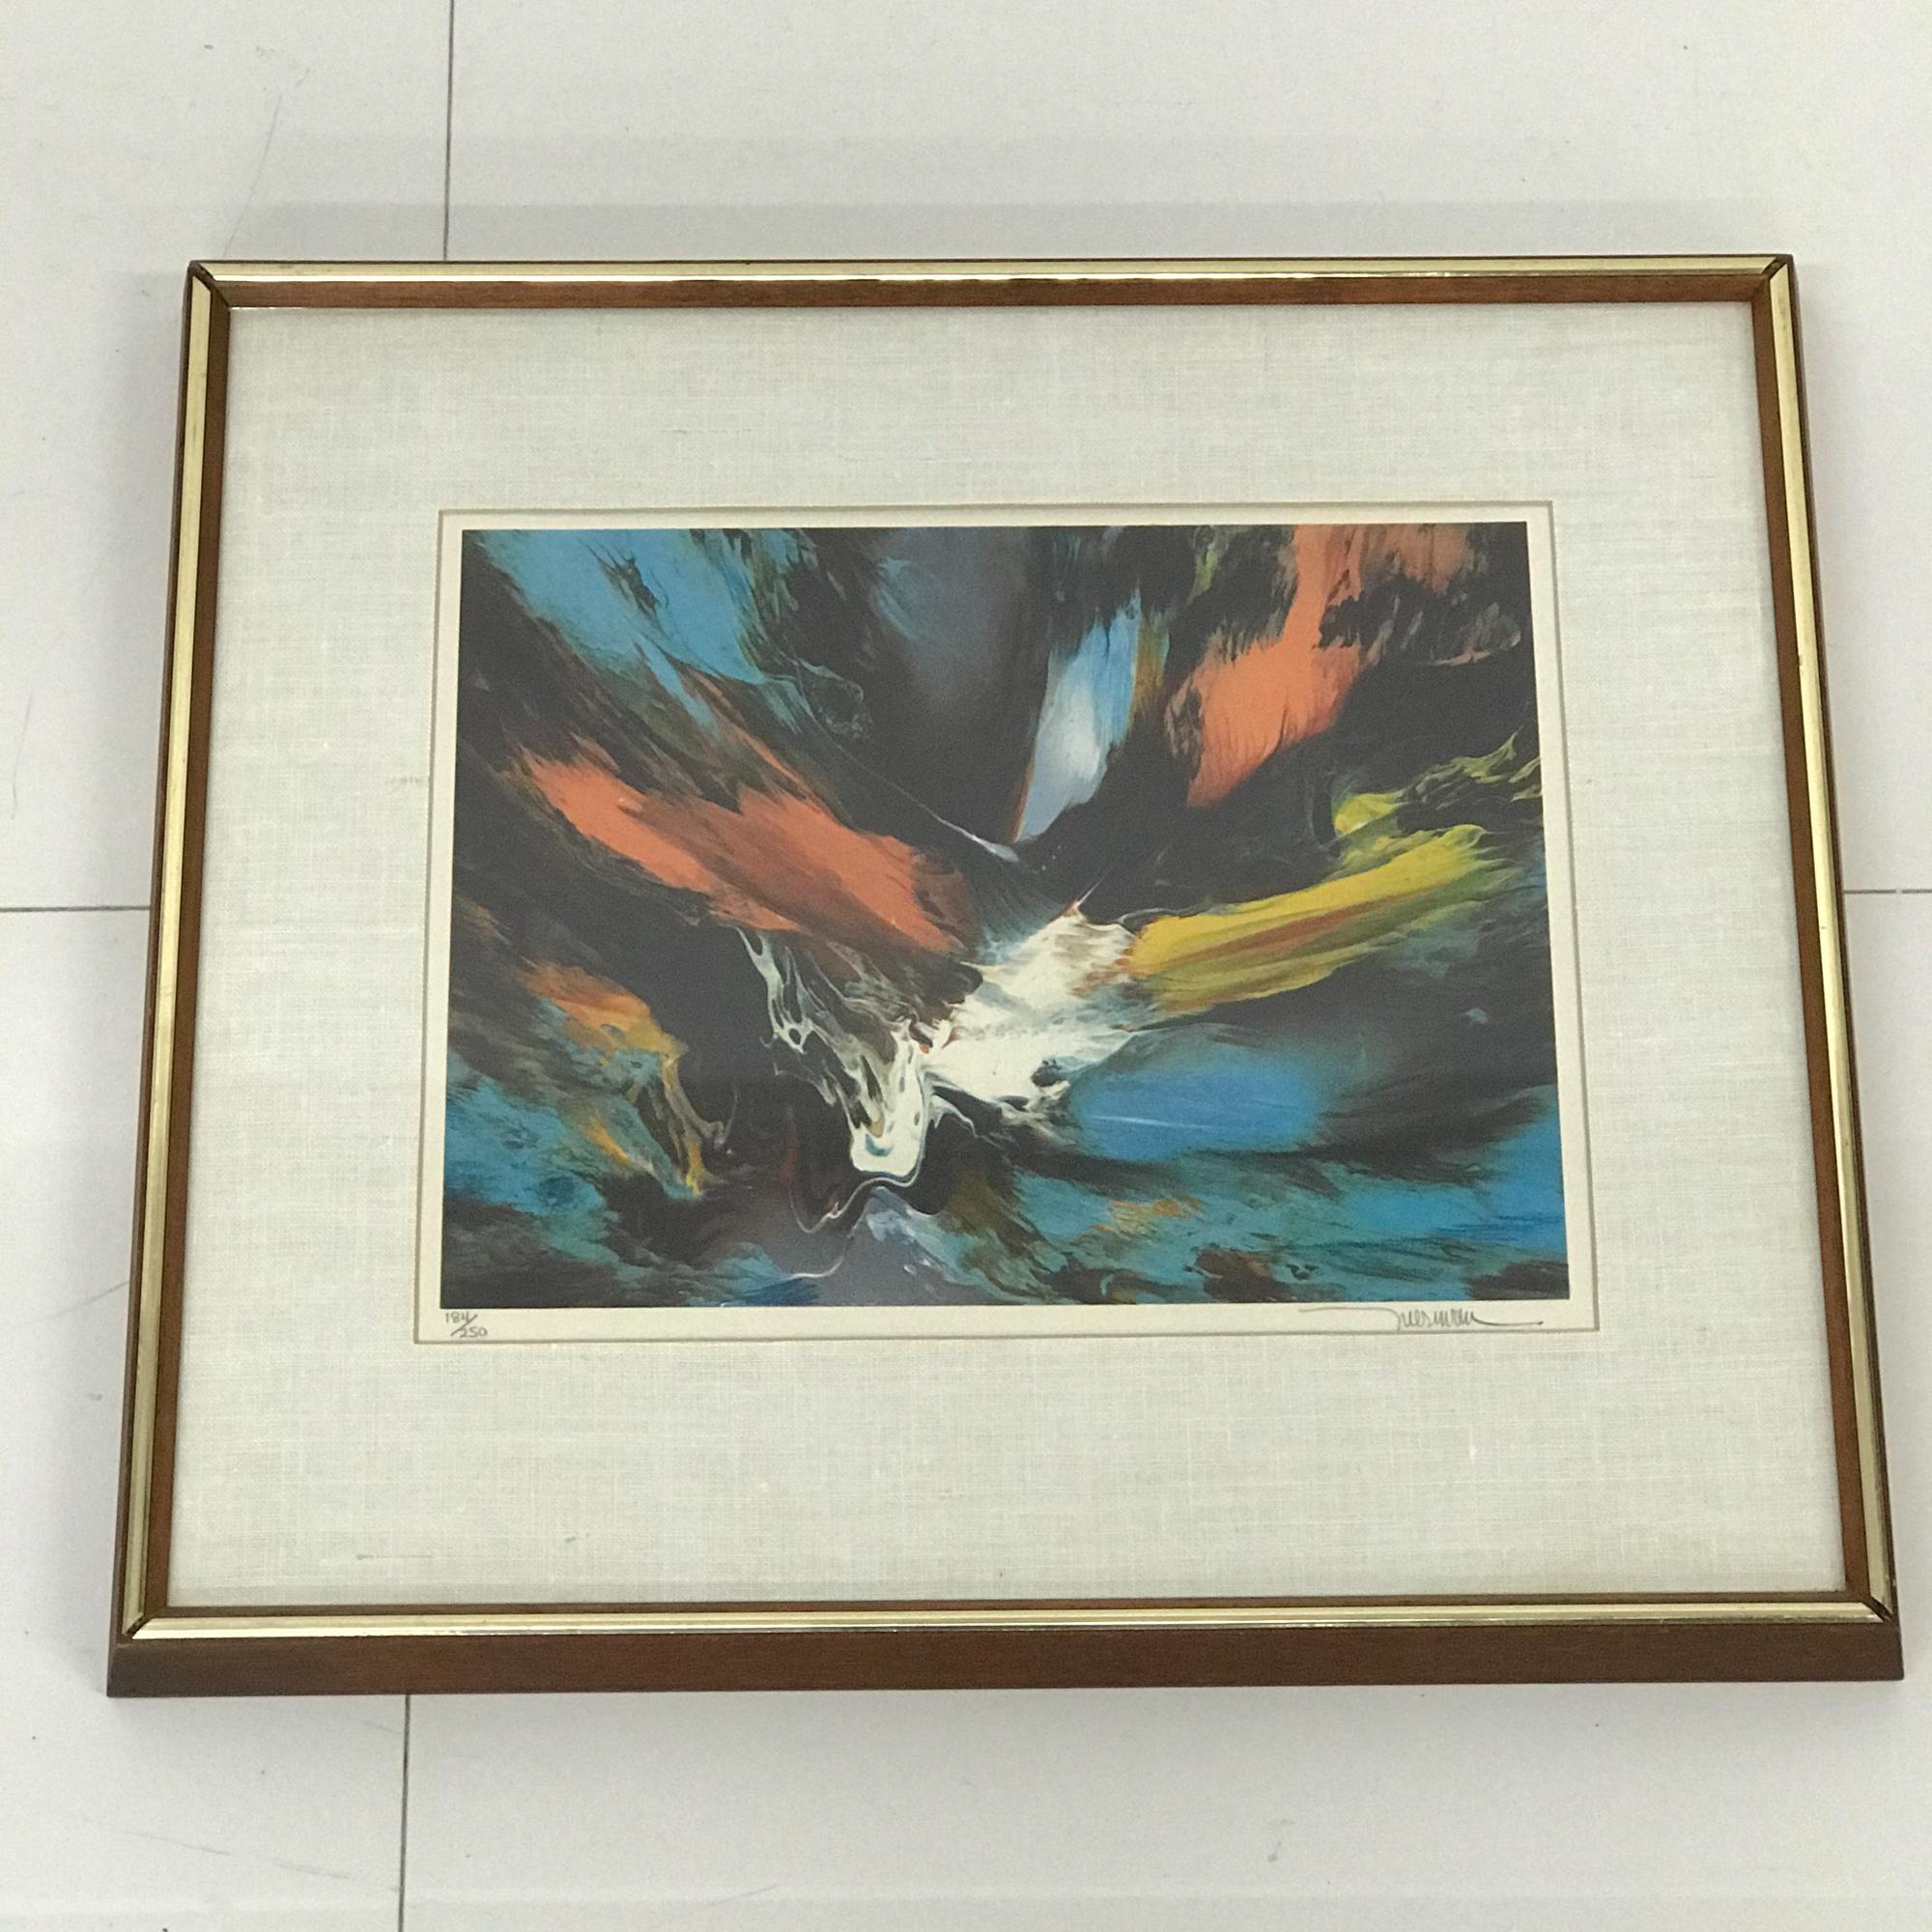 Small Abstract Wall Art Leonardo Nierman Lithograph #2 Signed 184/250 In Good Condition For Sale In Chula Vista, CA